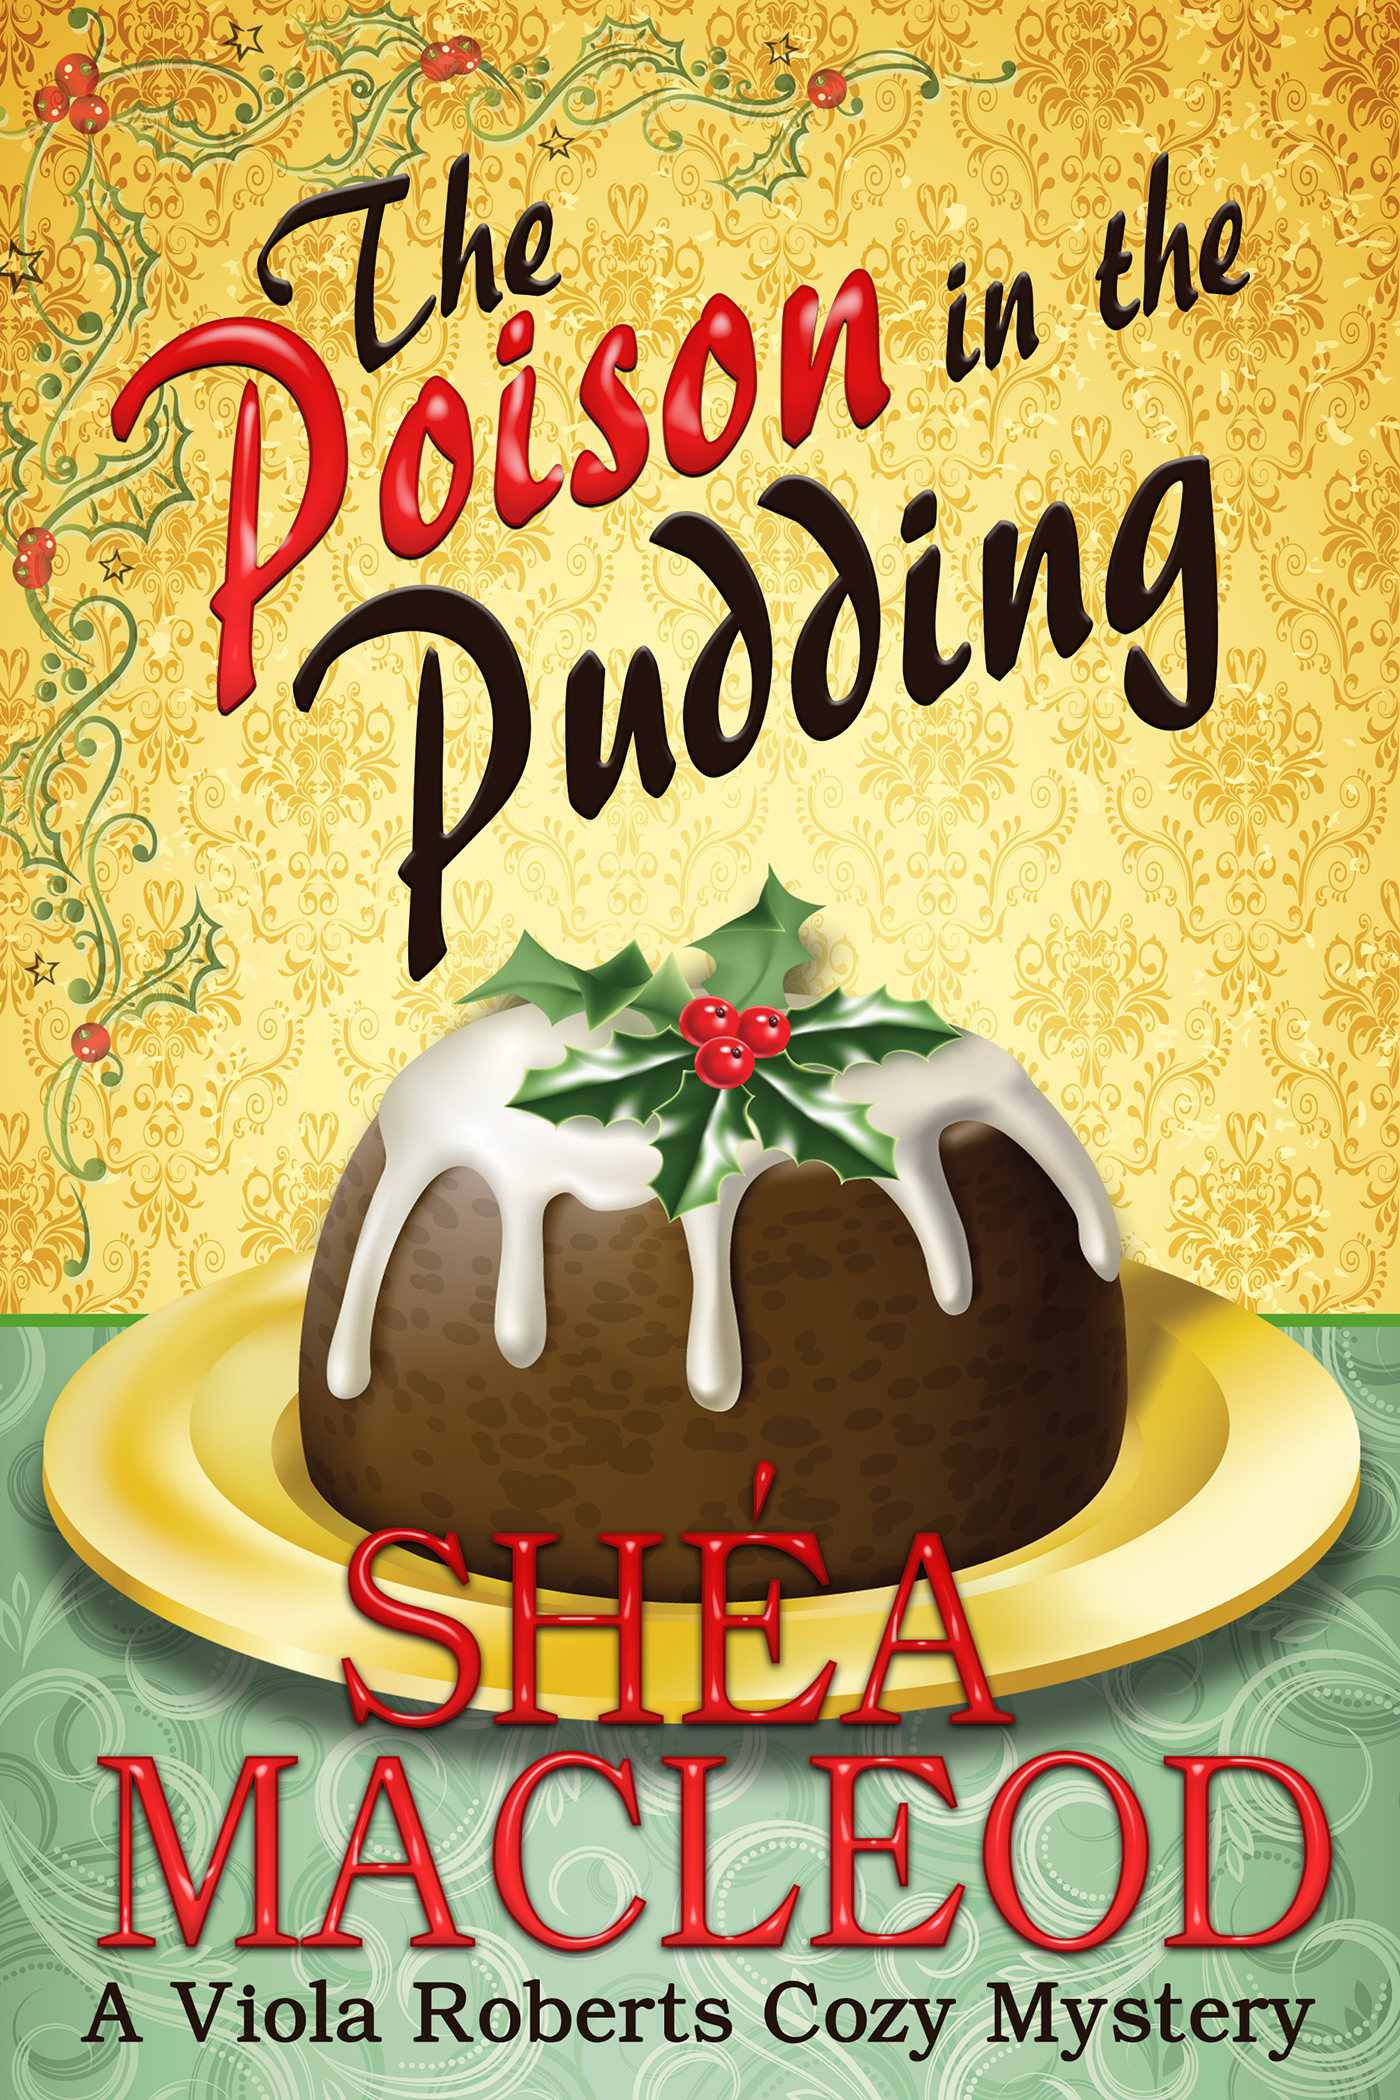 Adventures in Narration: Poison in the Pudding